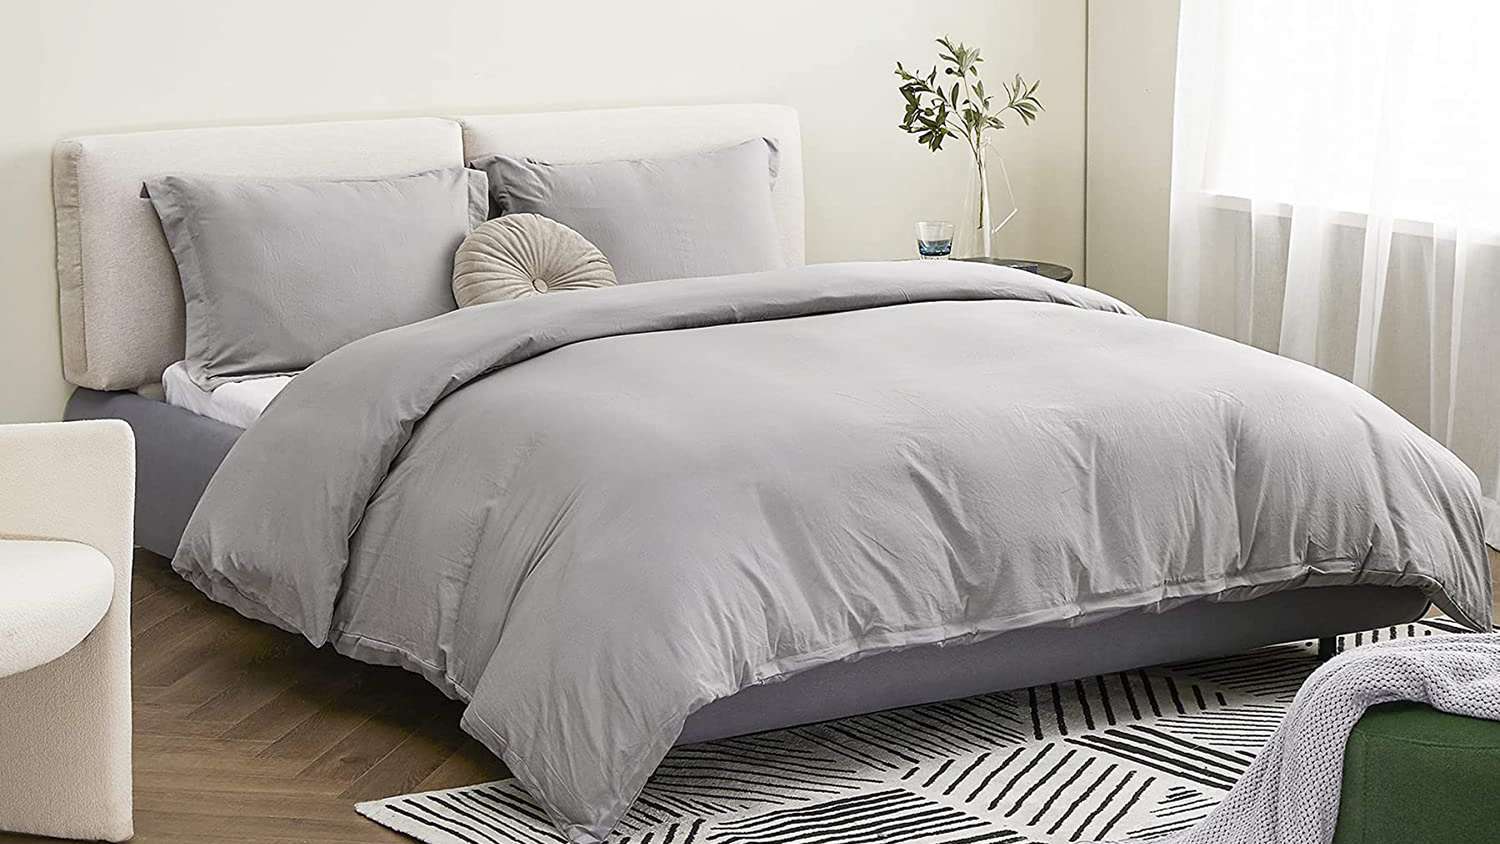 NON ALLERGENIC DUVET SOFT POLYCOTTON COVER HOTEL QUALITY  7.5 TOG 